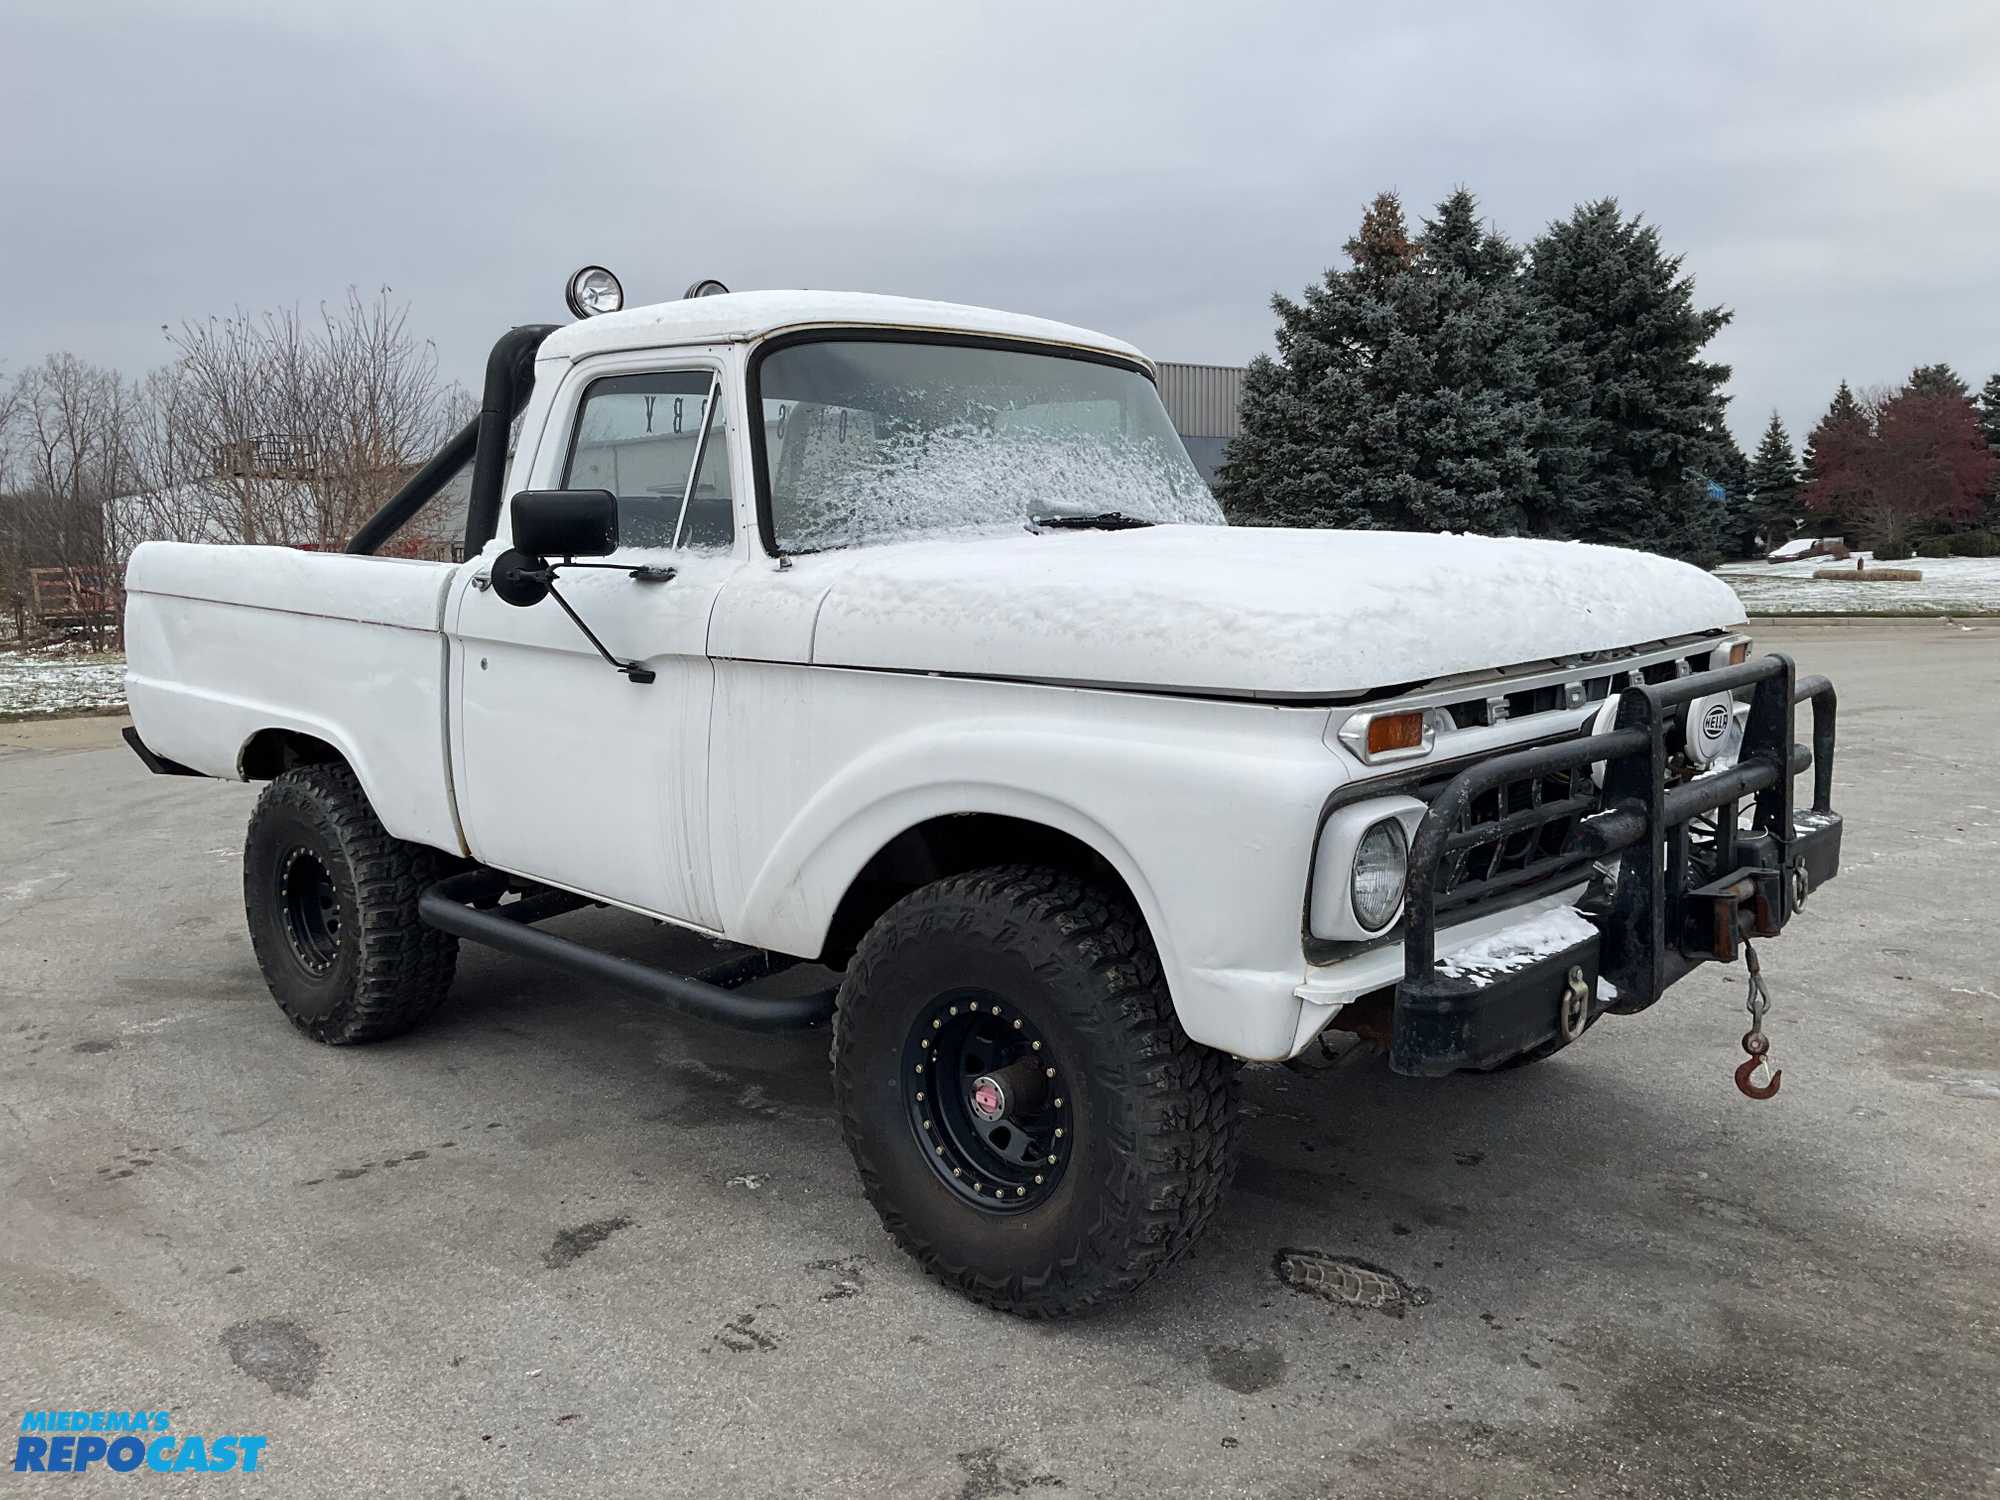 1965 Ford Pickup